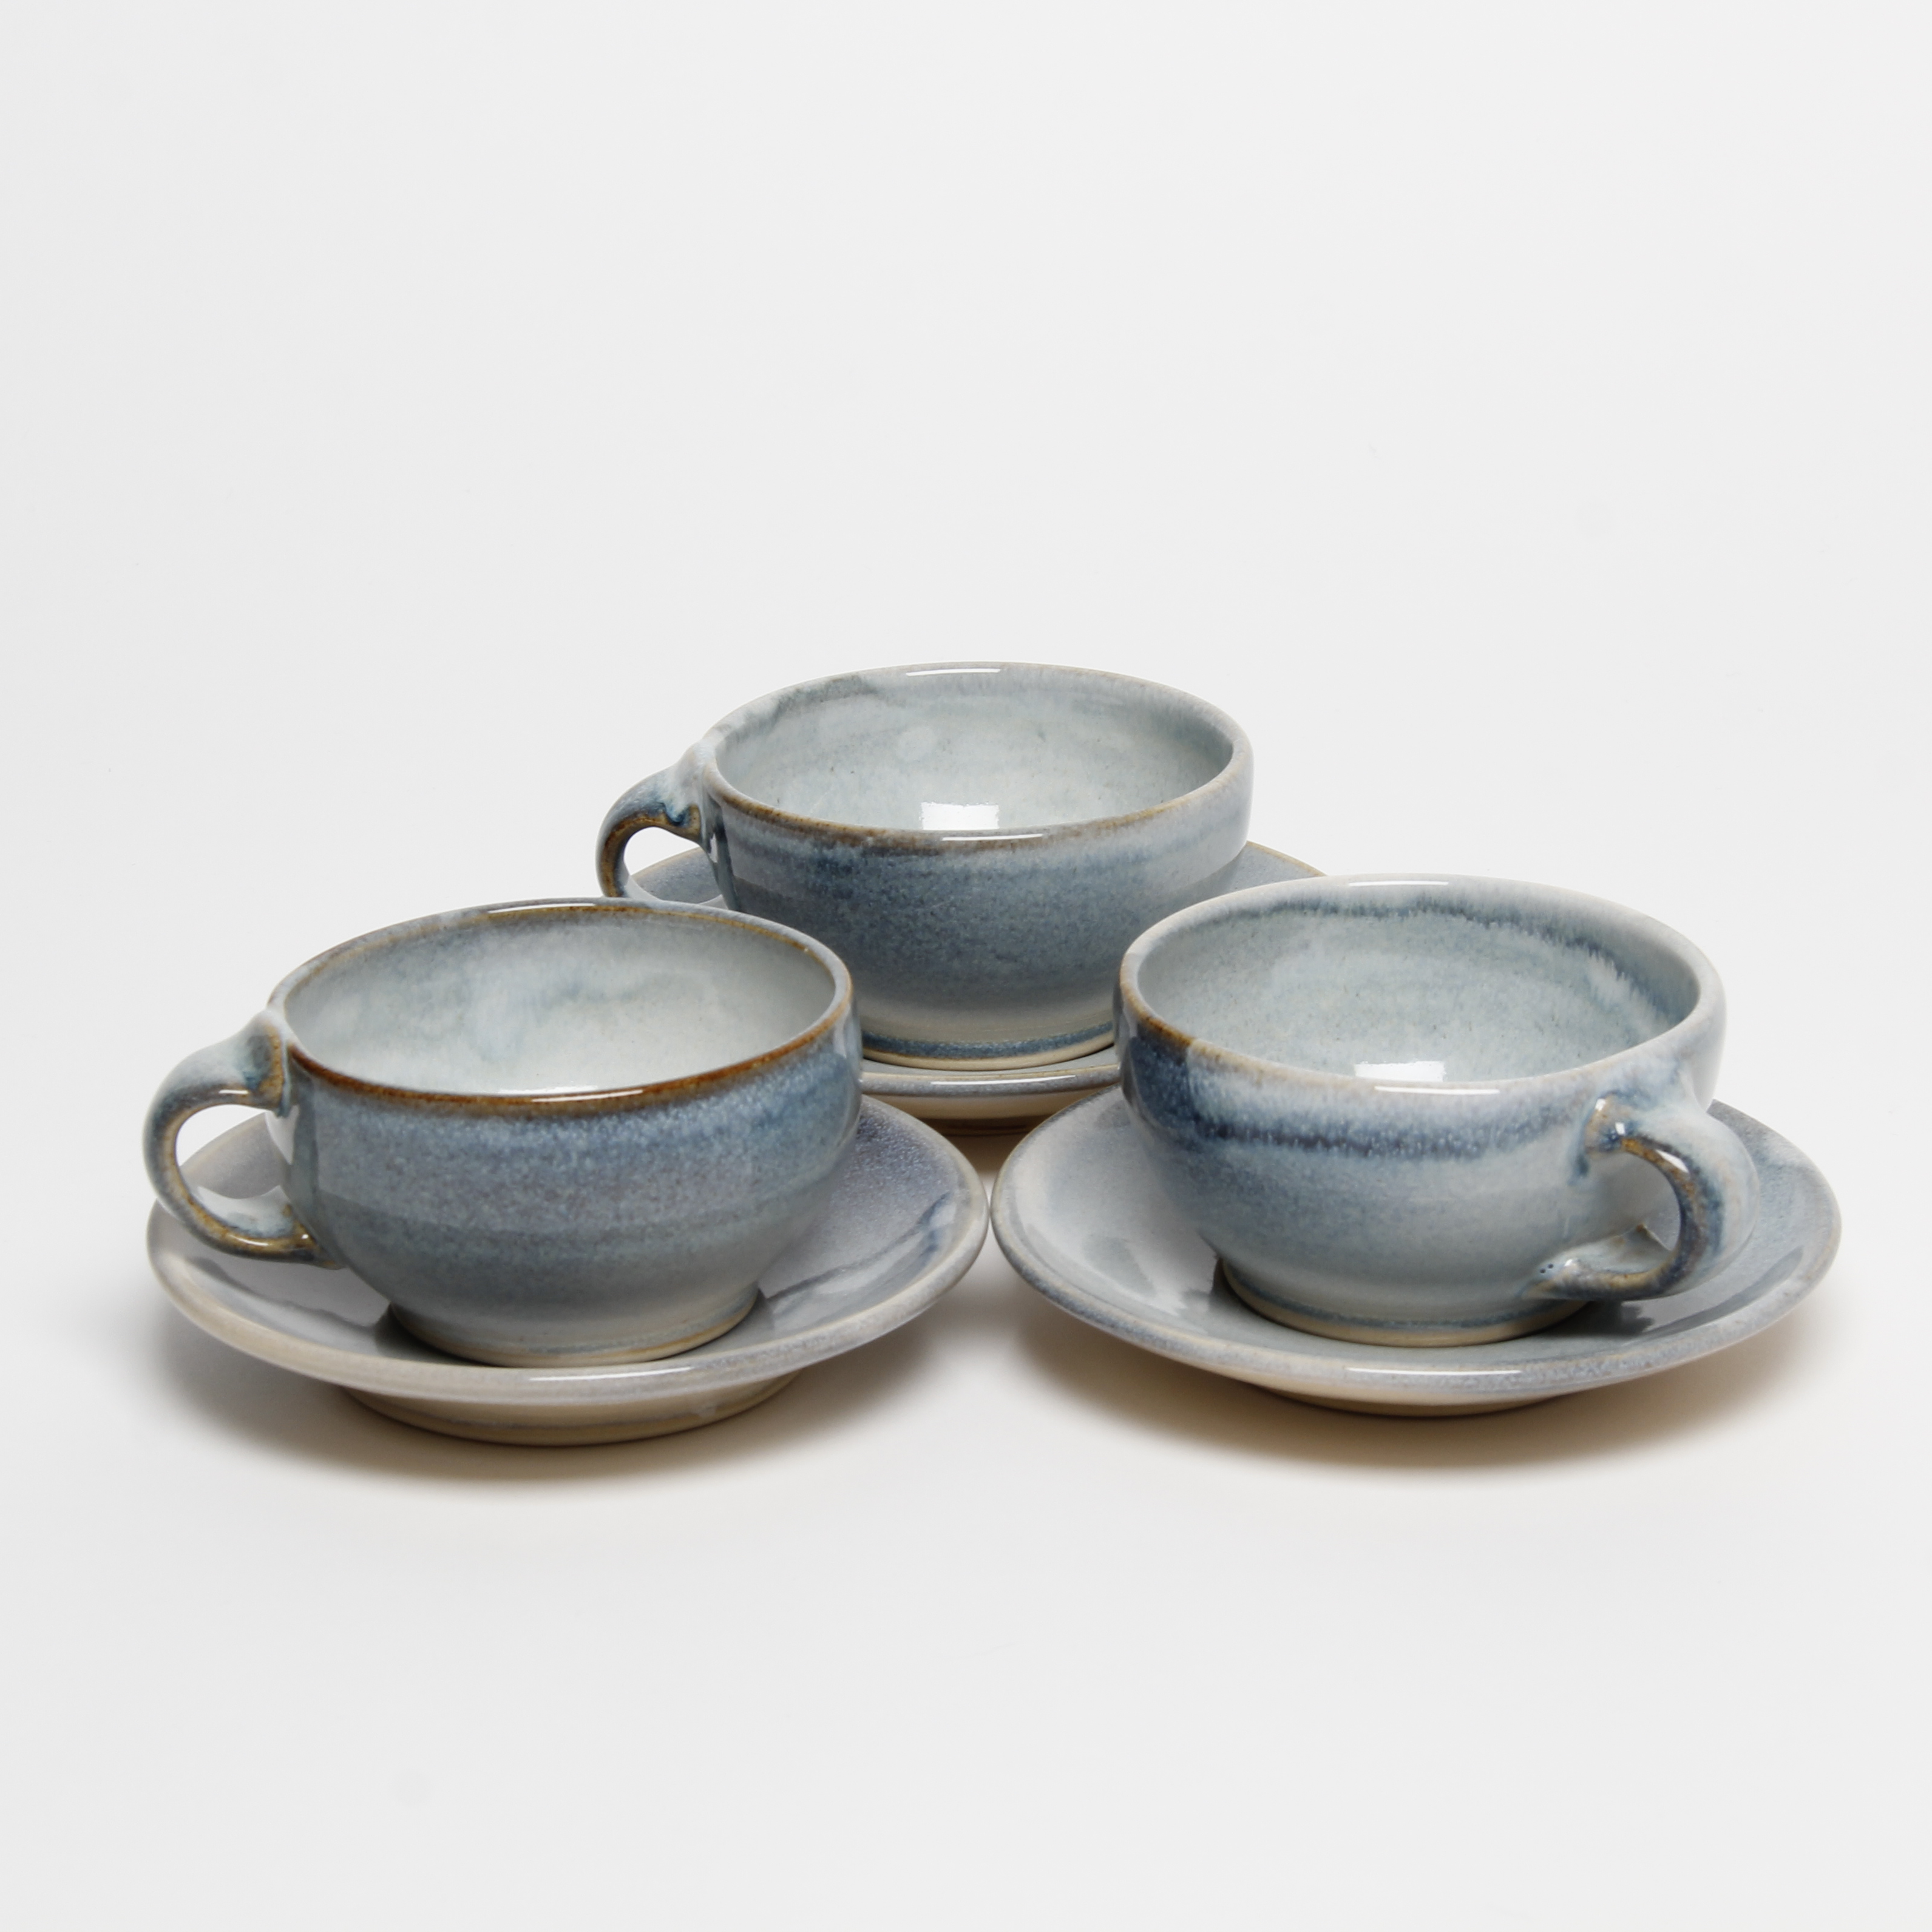 Teresa Dunlop: Cappuccino Cup Product Image 3 of 6